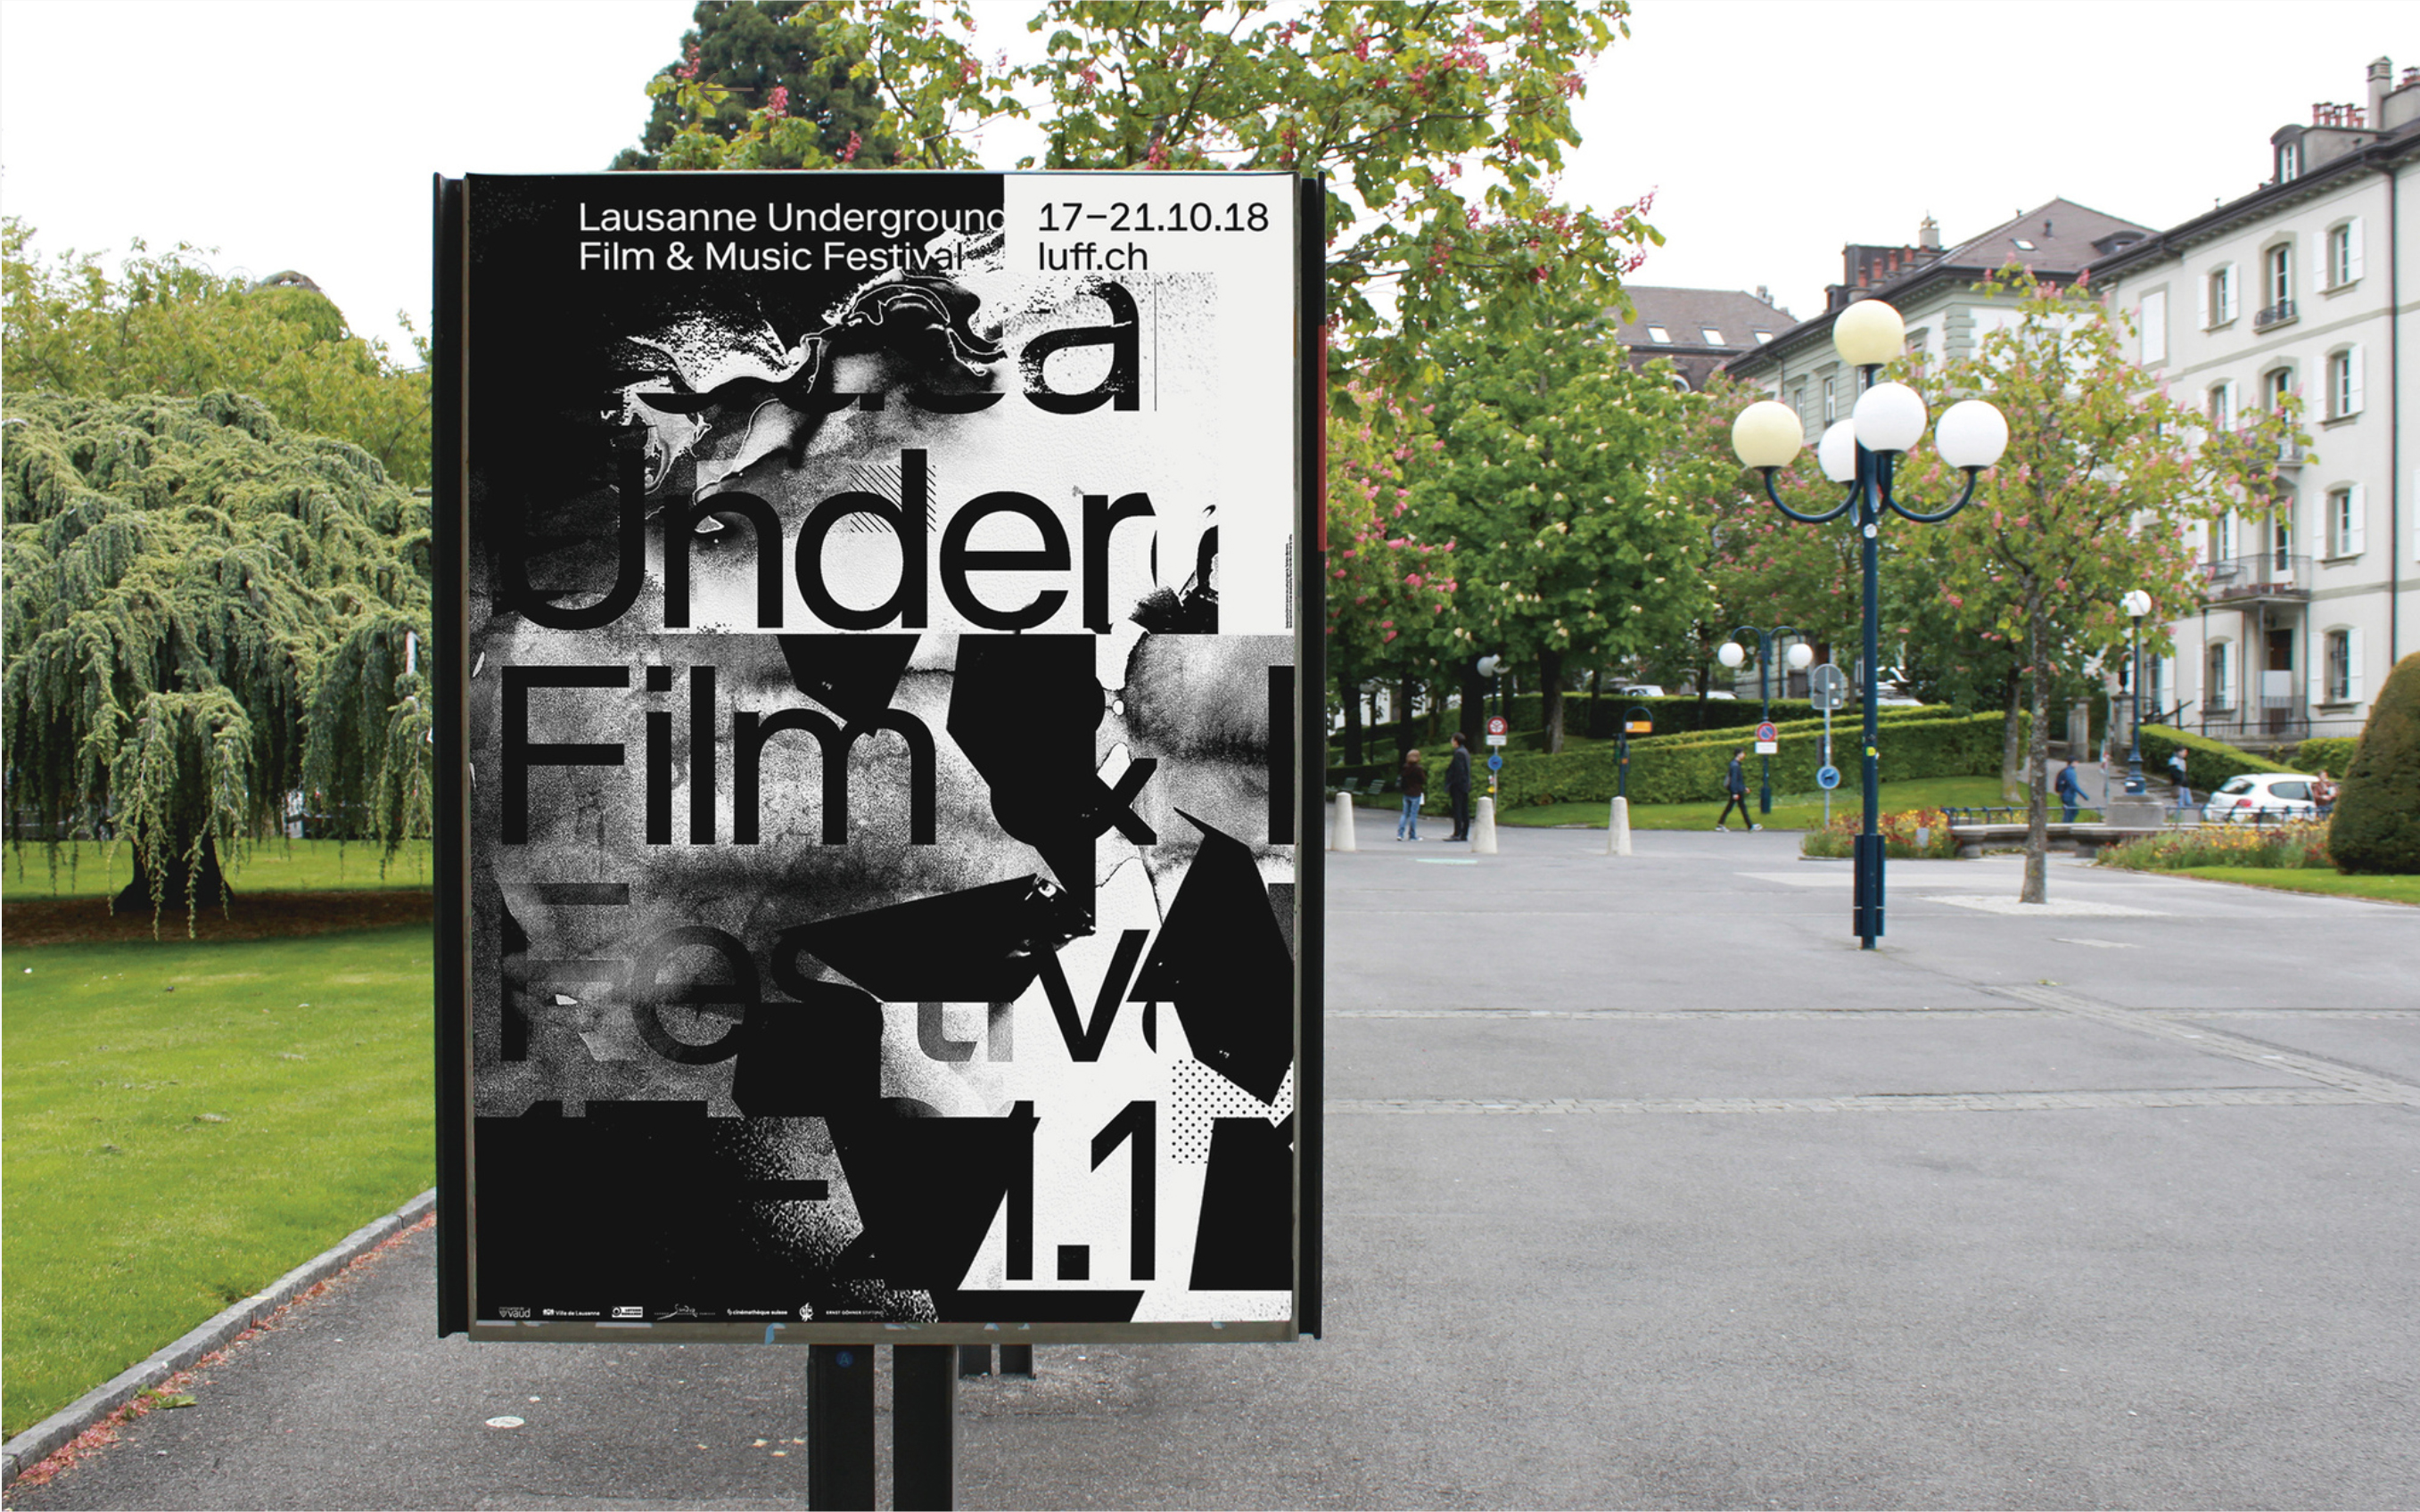 10-facts-about-lausanne-underground-film-music-festival